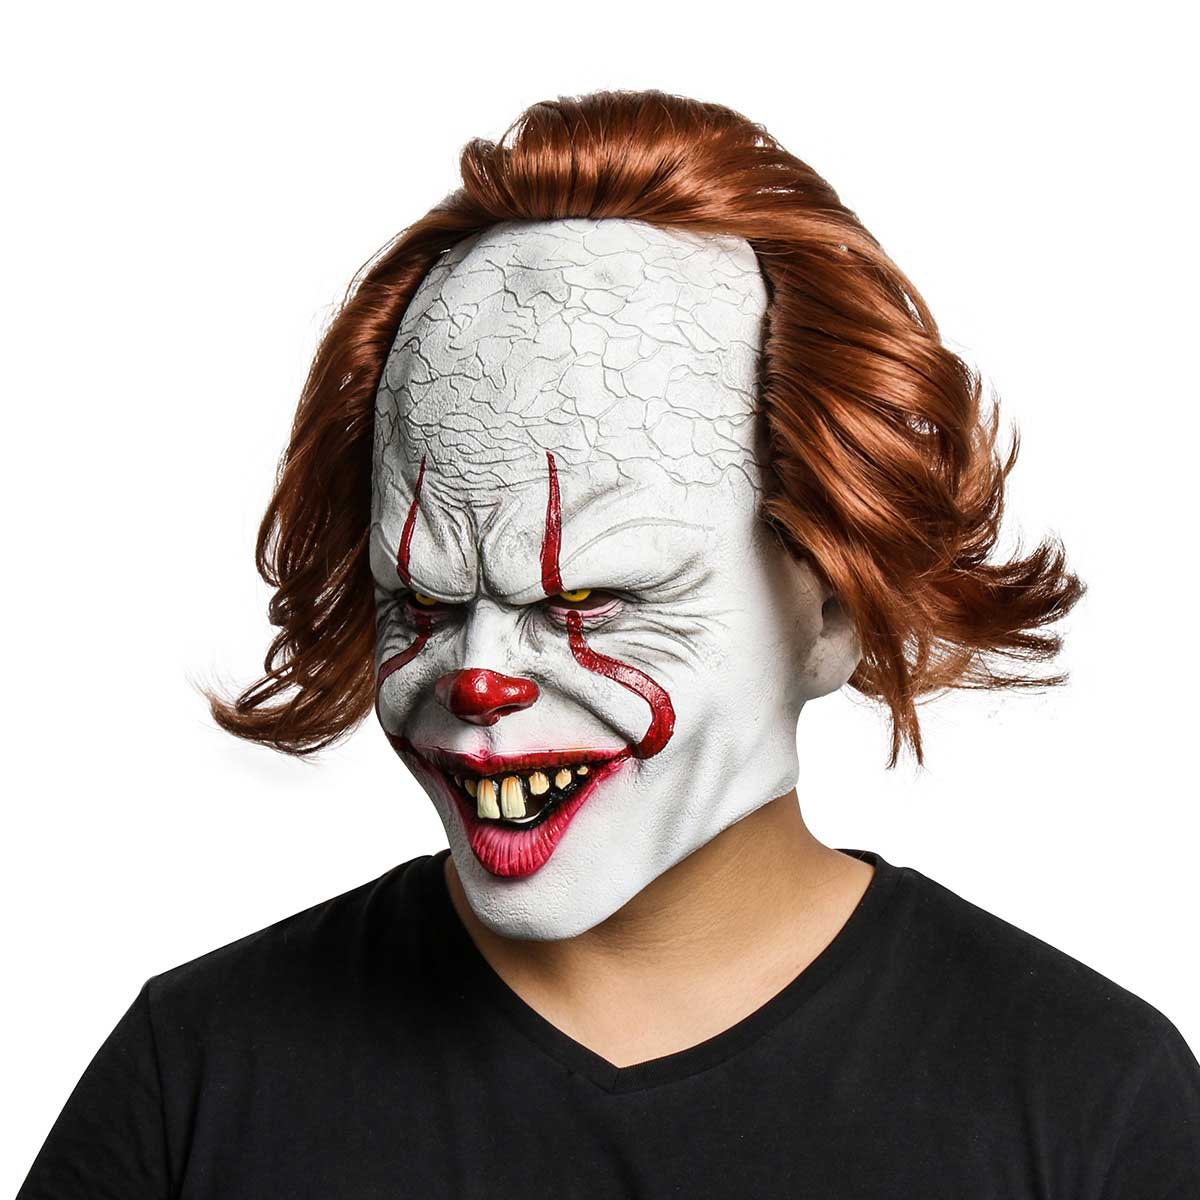 Capitolo 2 pennywise spaventoso halloween cosplay latex maschera di lattice Stephen King IT costume parrucca